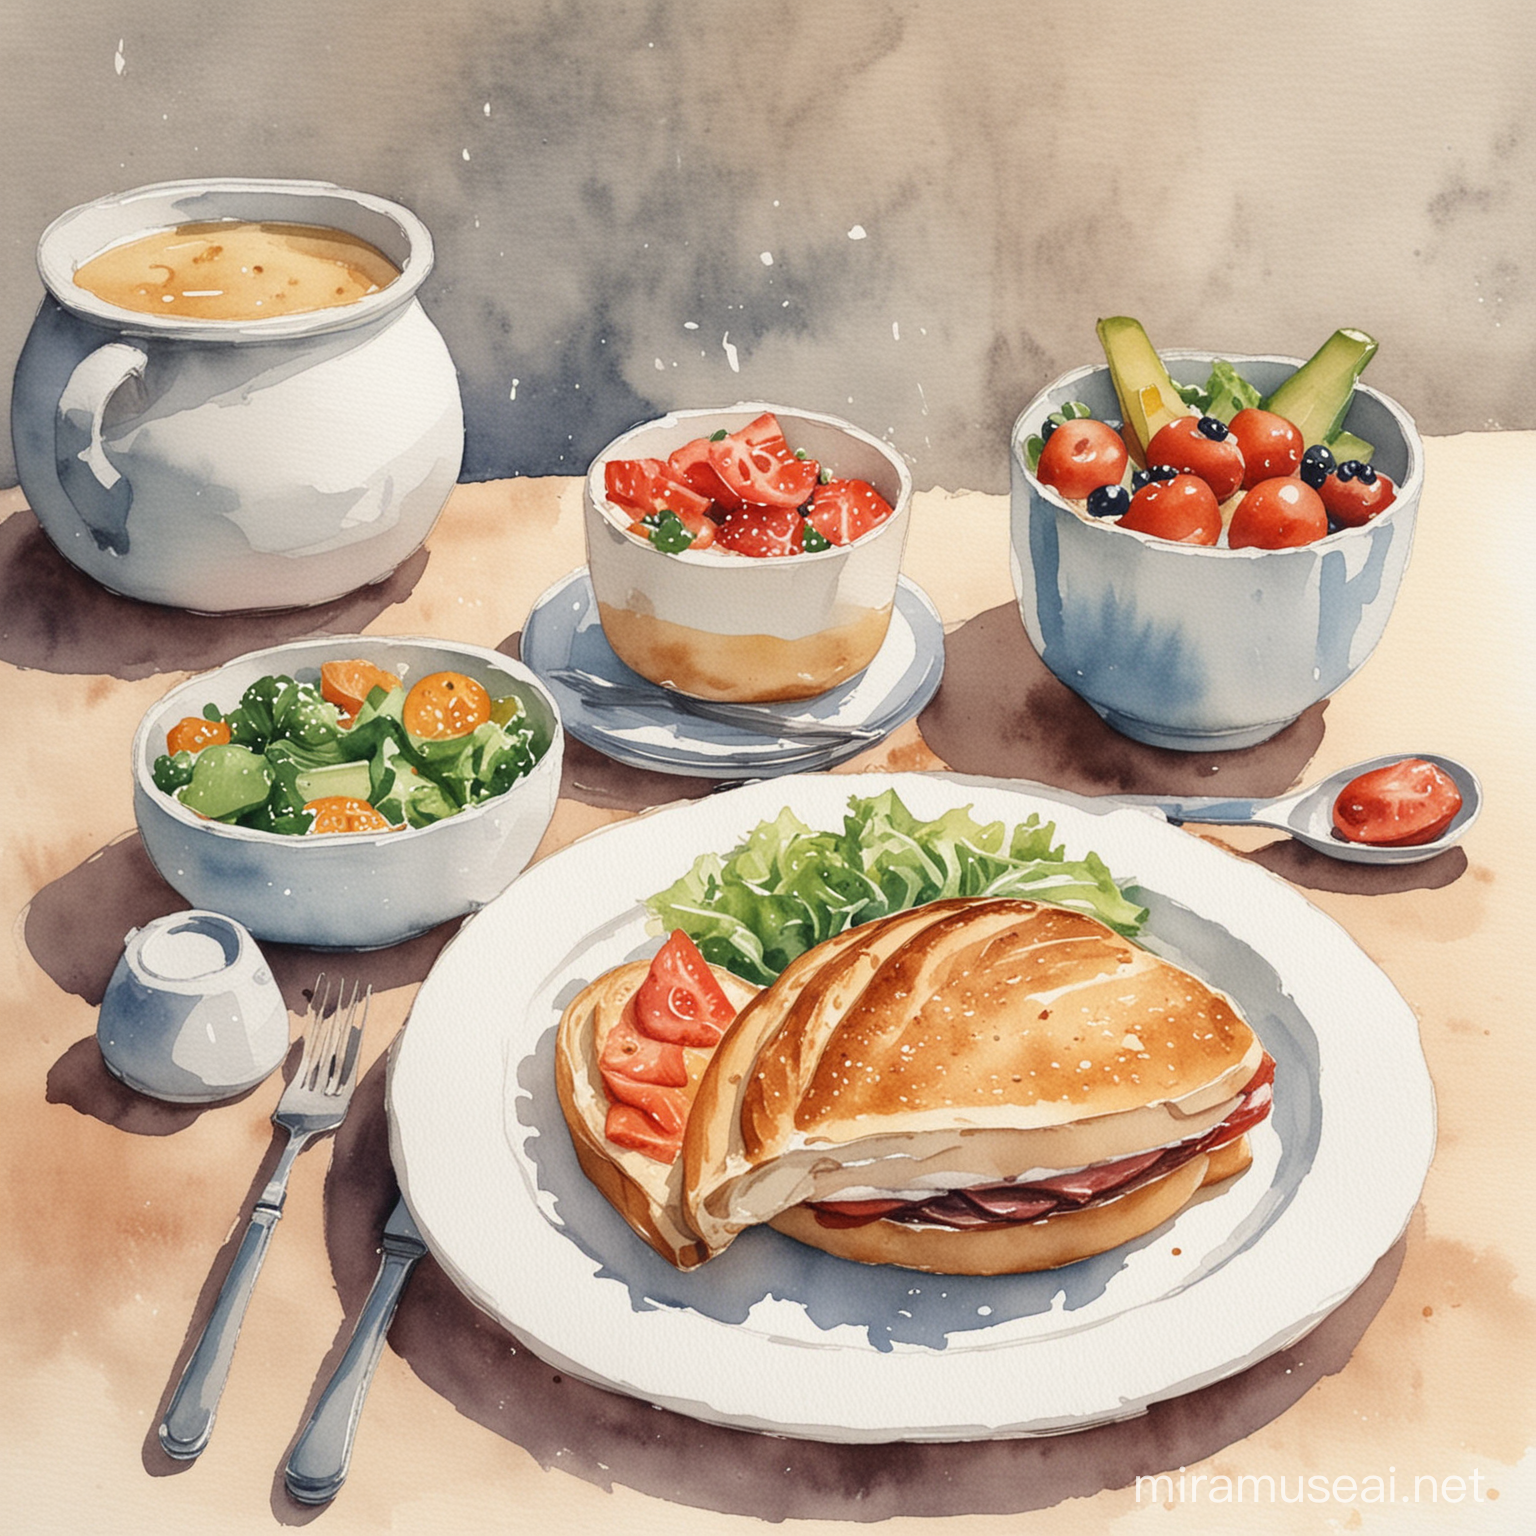 Watercolor Style Lunch Delicious Food in Artistic Splendor